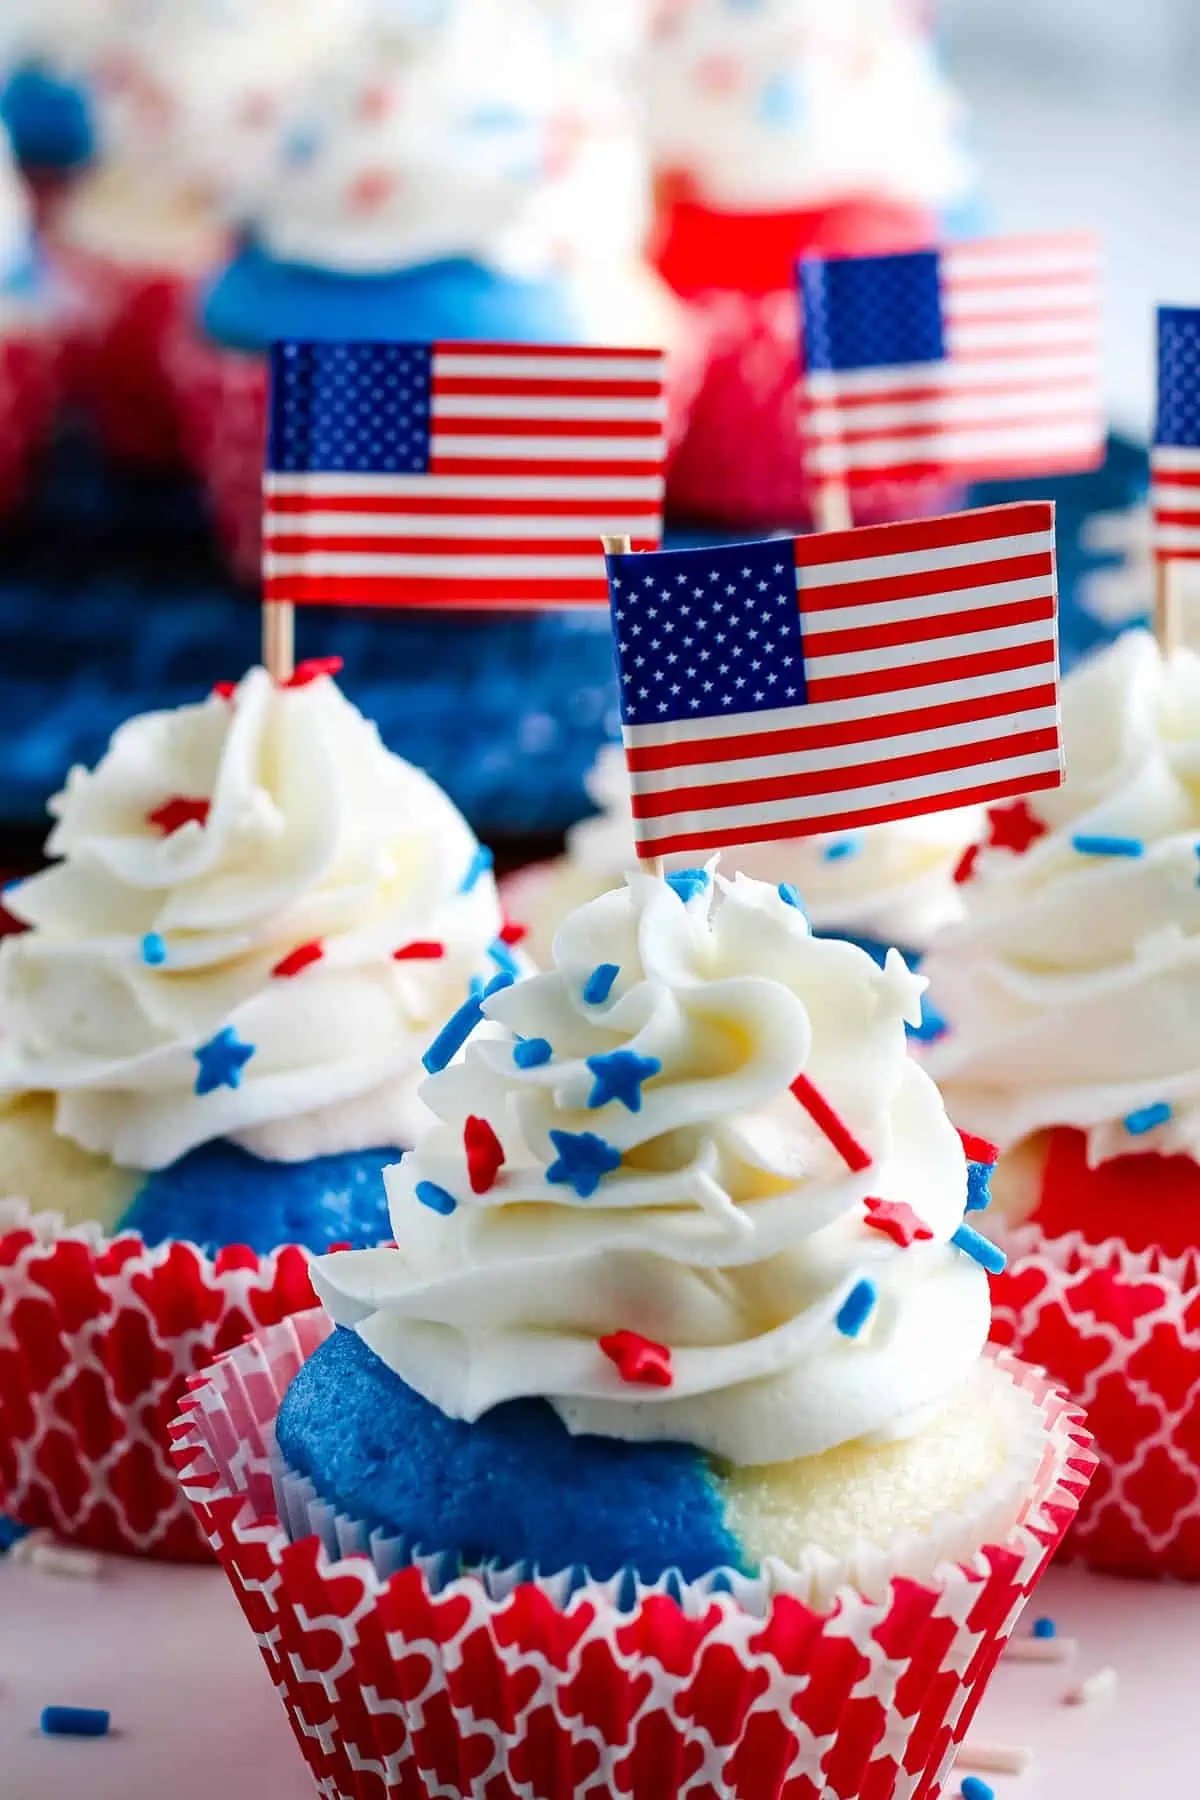 4th of July cupcakes topped with buttercream frosting, patriotic sprinkles, and American flag cupcake toppers